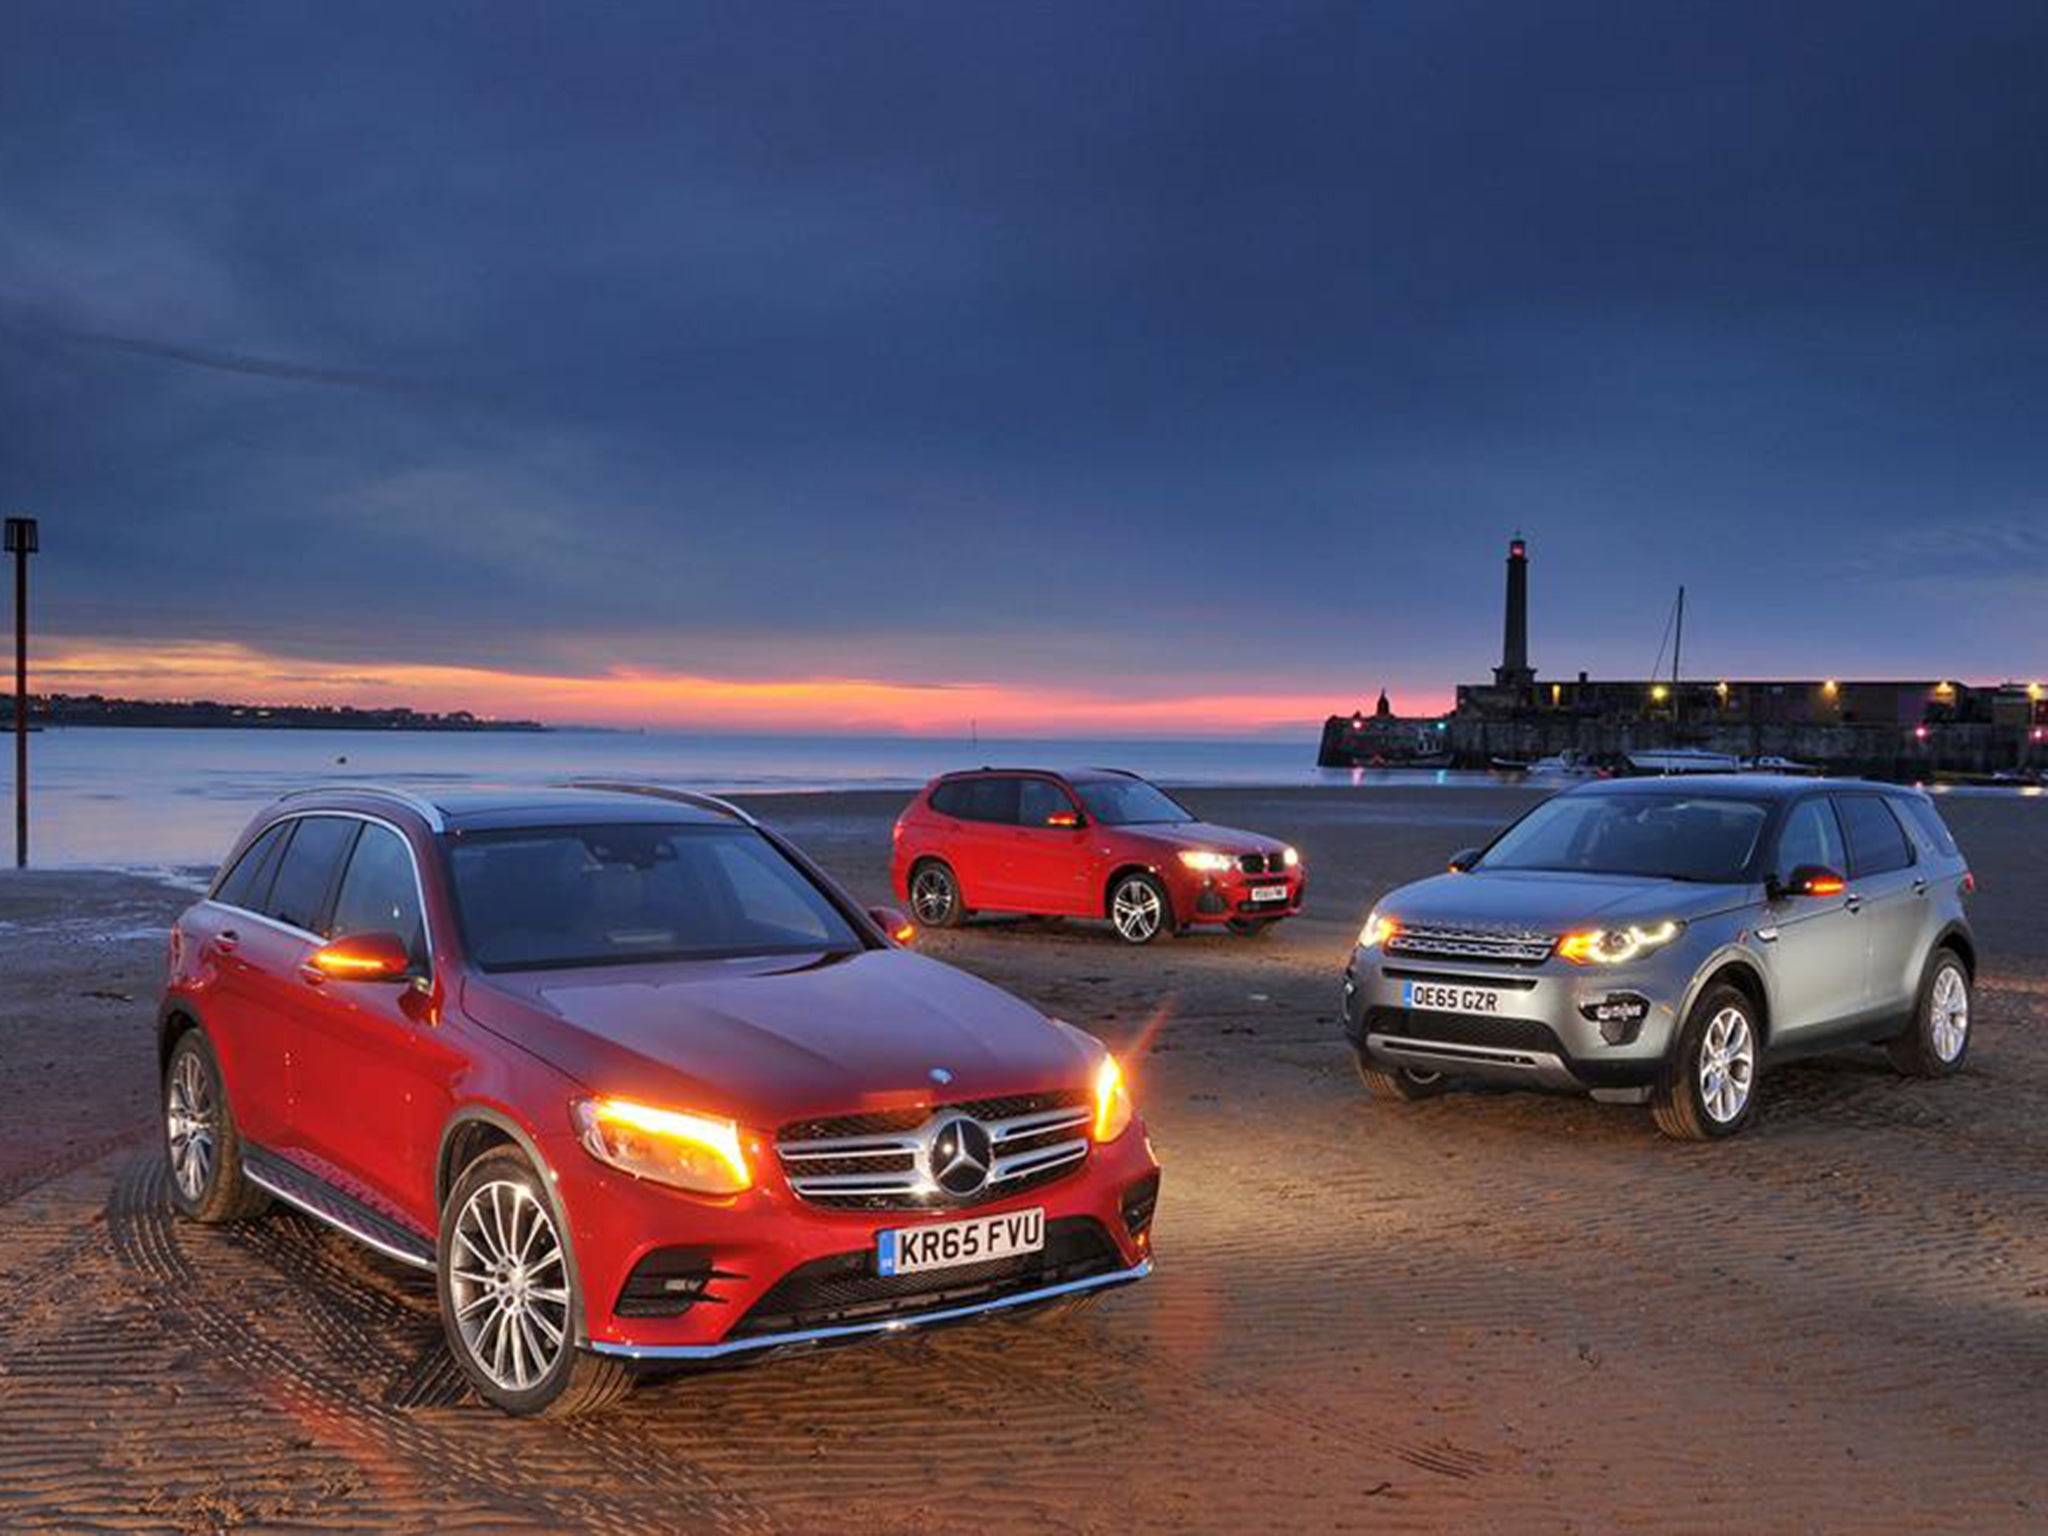 The Mercedes-Benz GLV and Land Rover Discovery Sport offer competition to the BMW X3